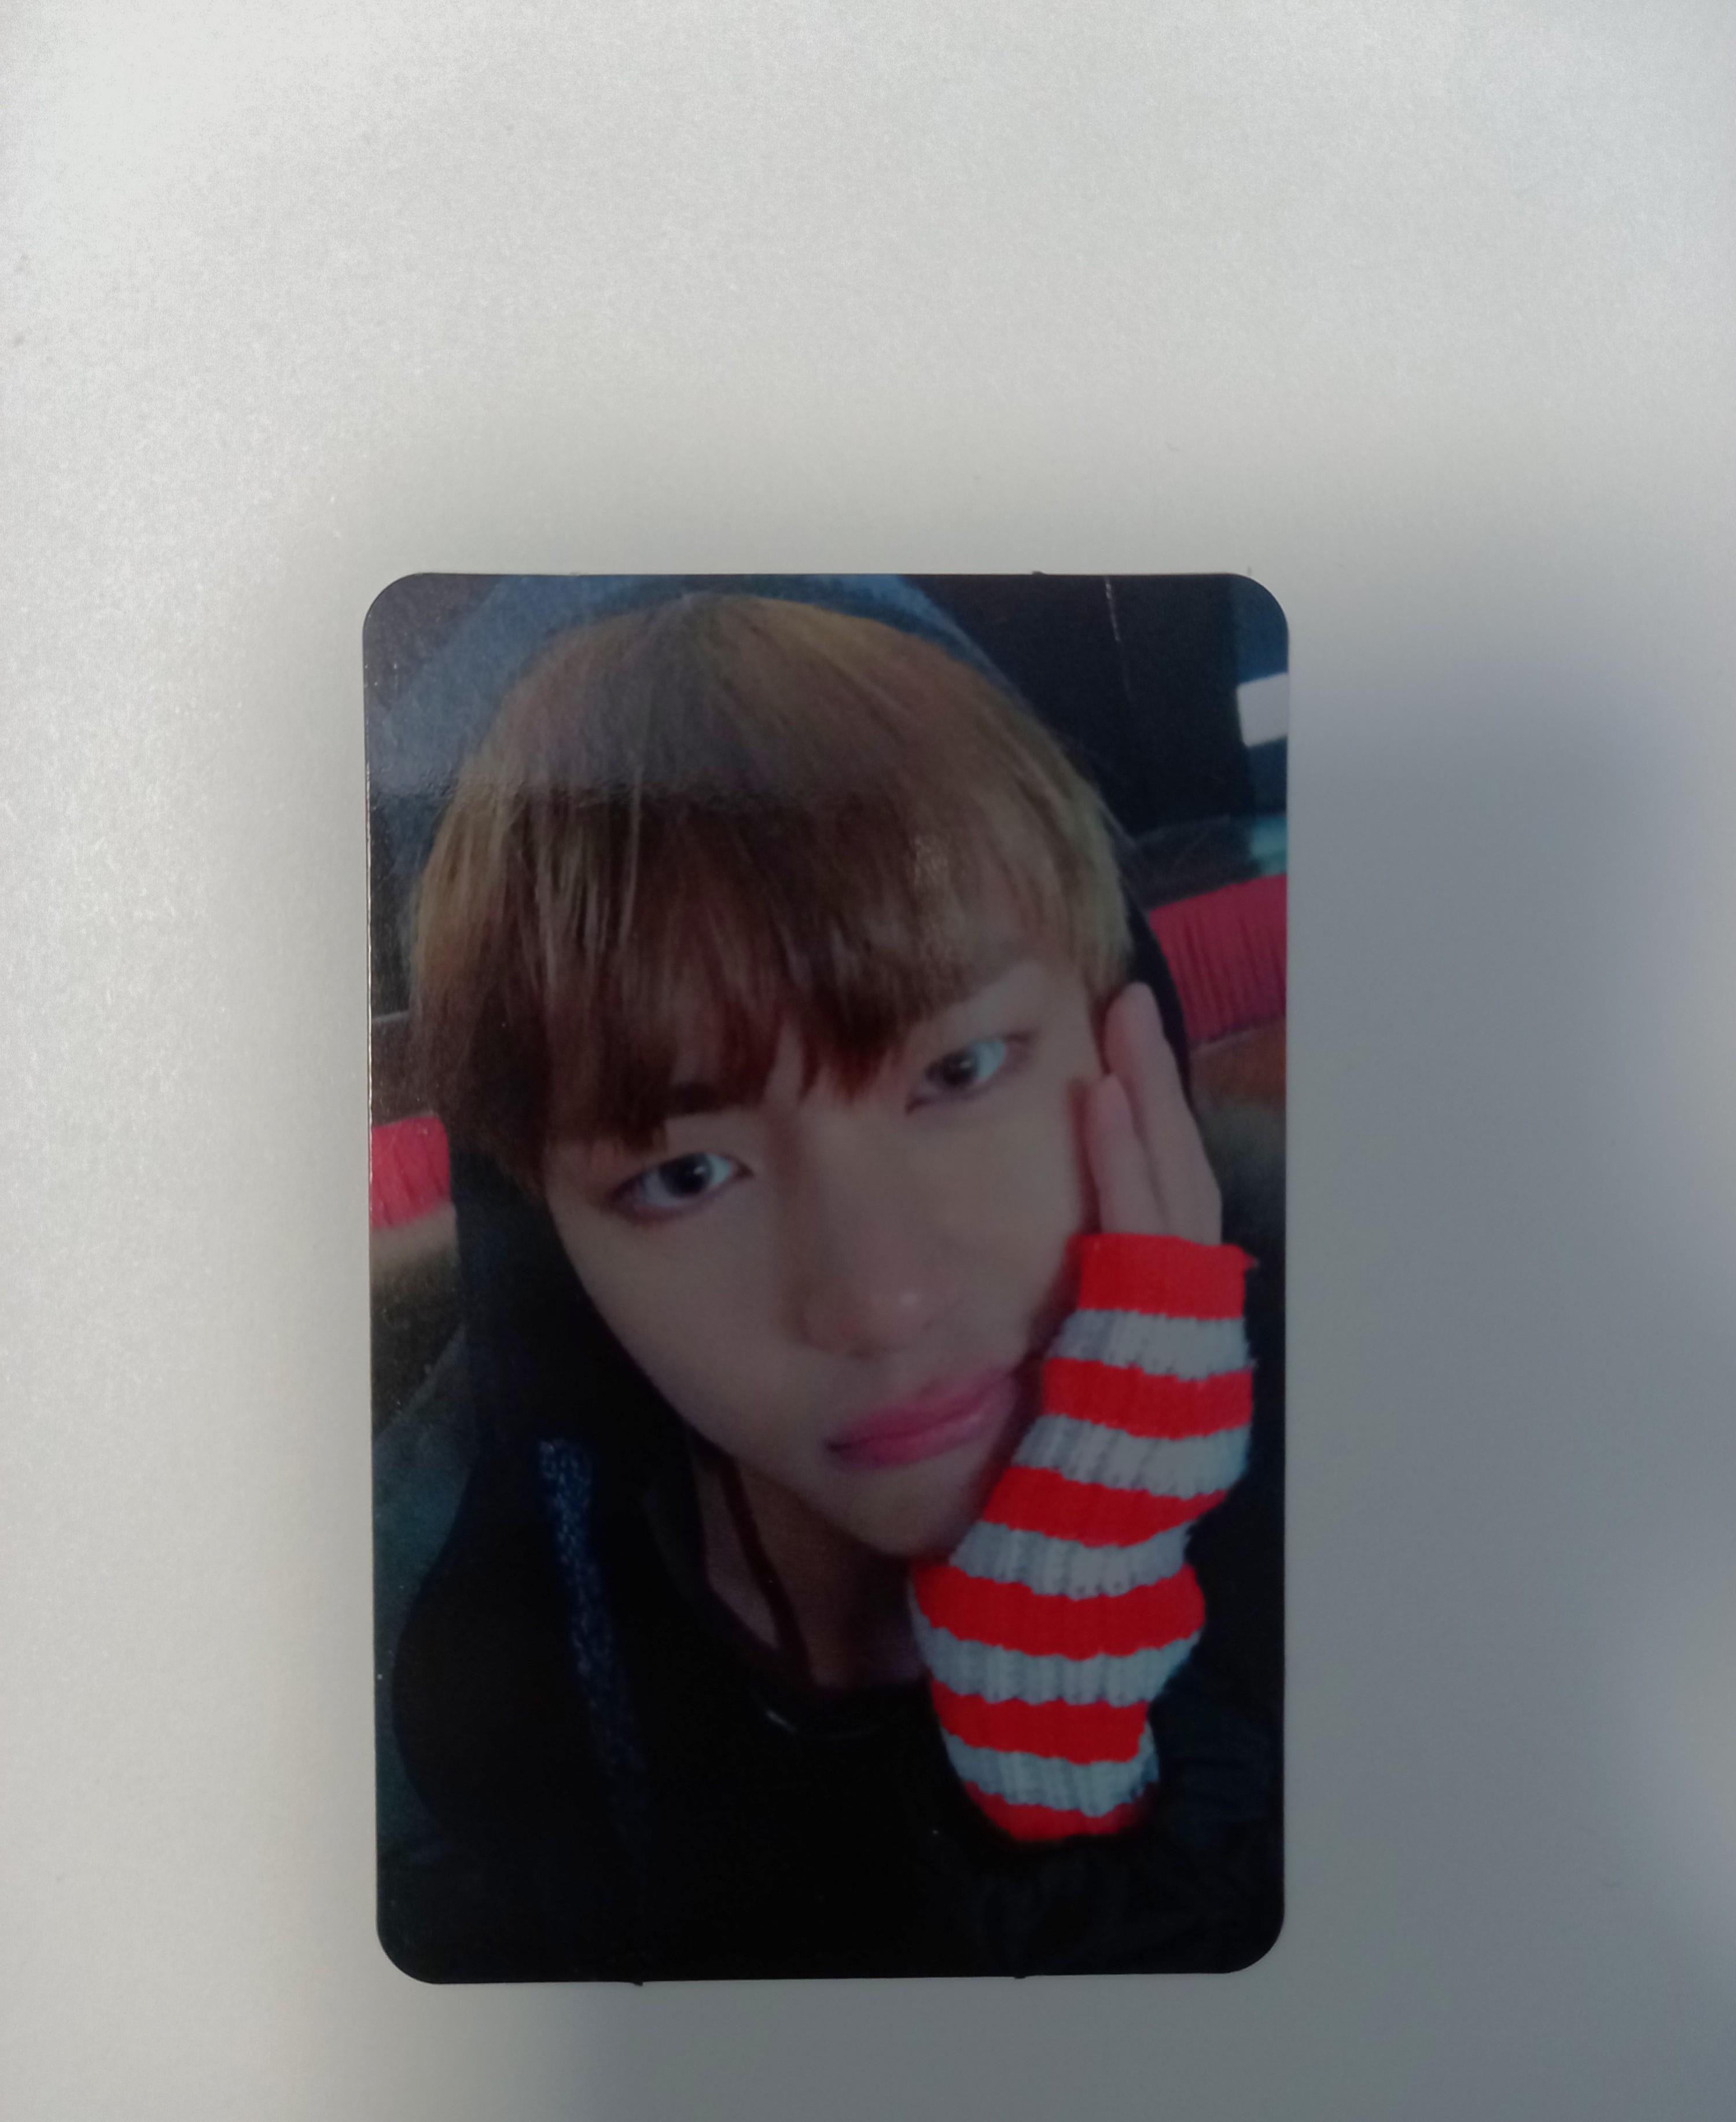 Wts Bts Taehyung Photocard Ynwa You Never Walk Alone Entertainment K Wave On Carousell